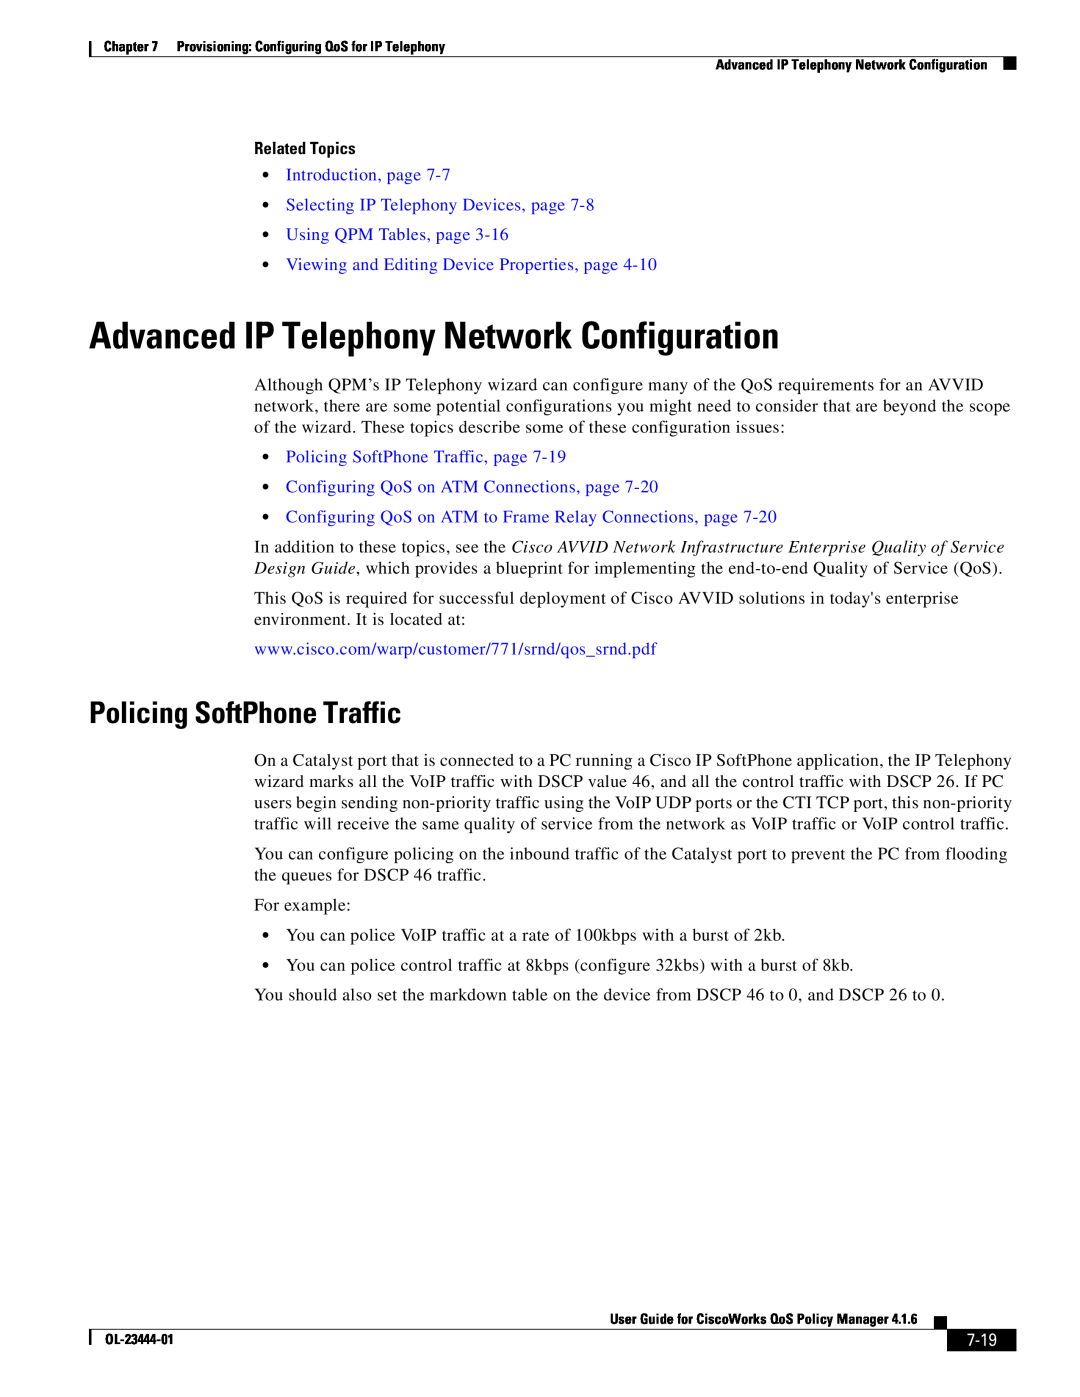 Cisco Systems 416 manual Advanced IP Telephony Network Configuration, Policing SoftPhone Traffic, 7-19, Related Topics 